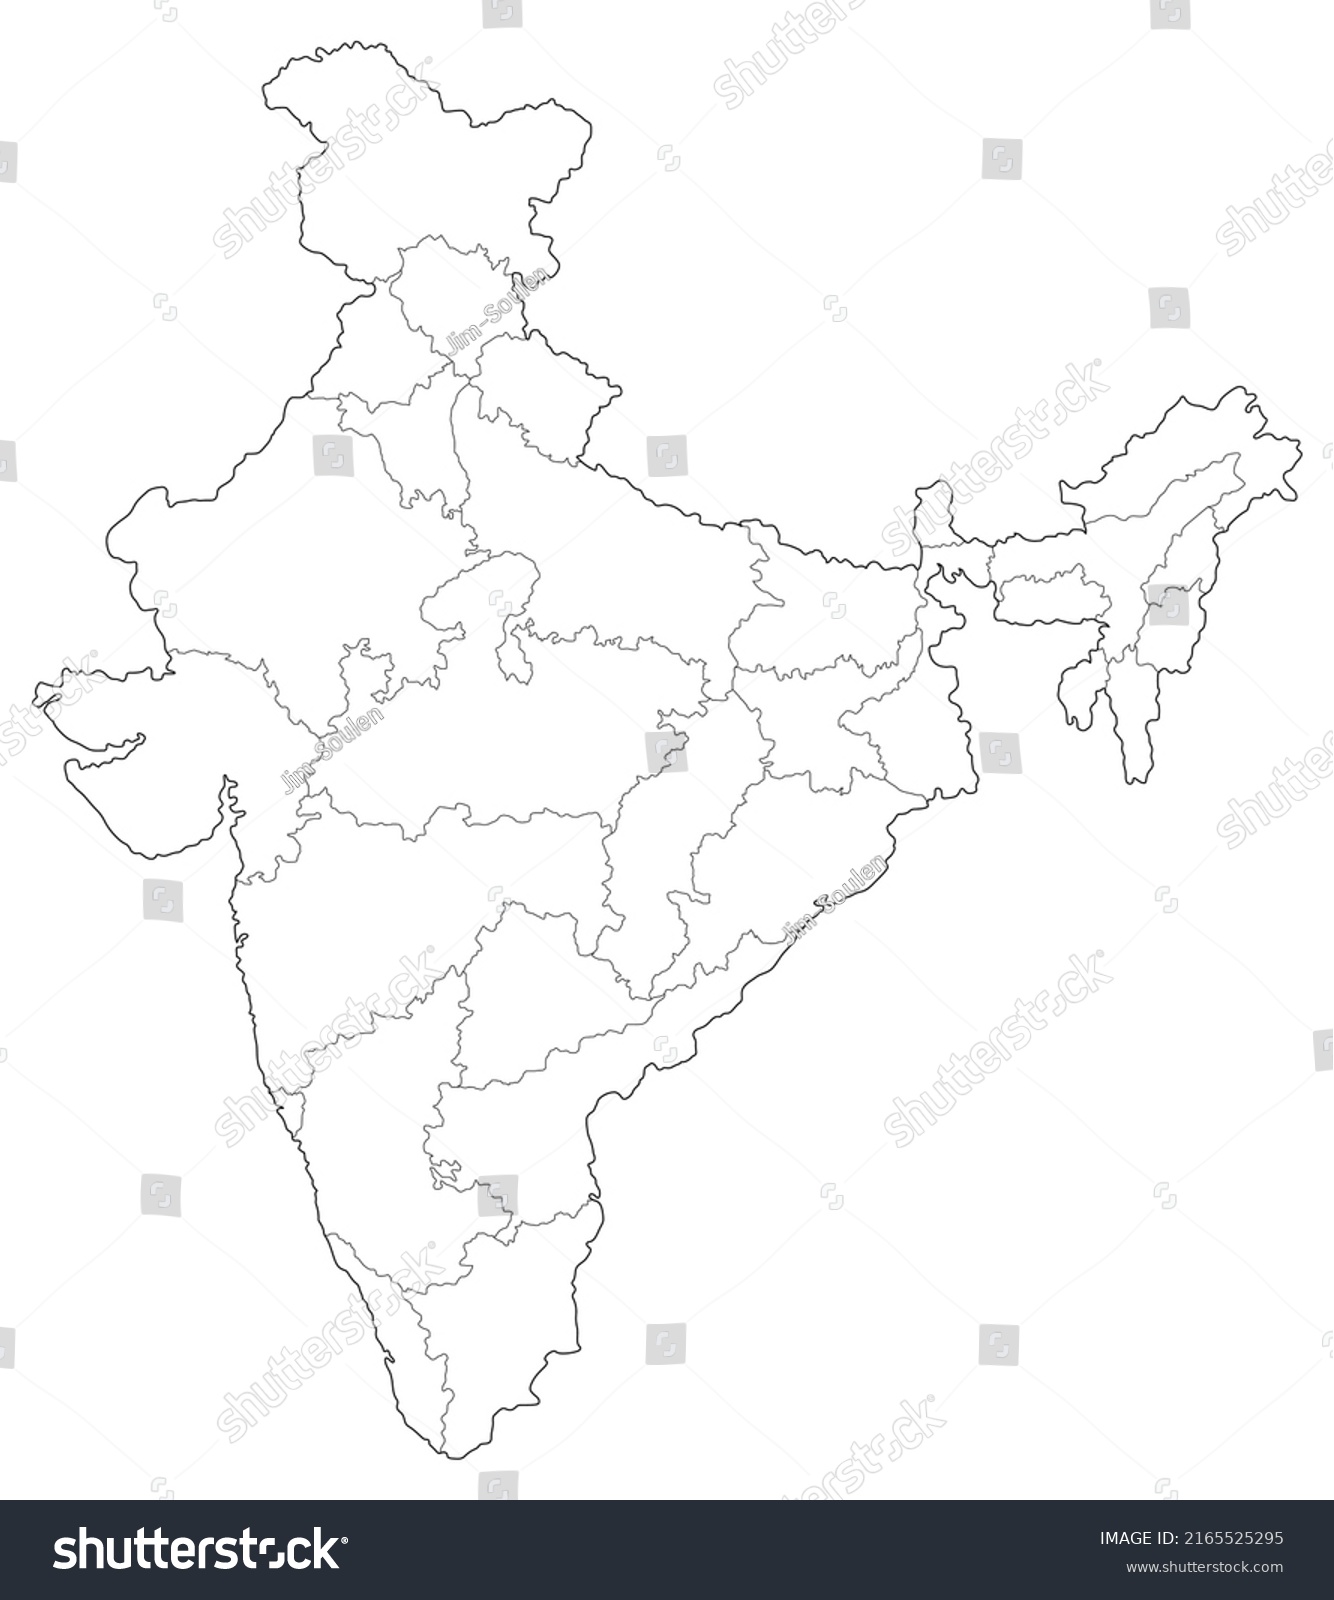 Aadithya S Maps Indian Political Map 7485